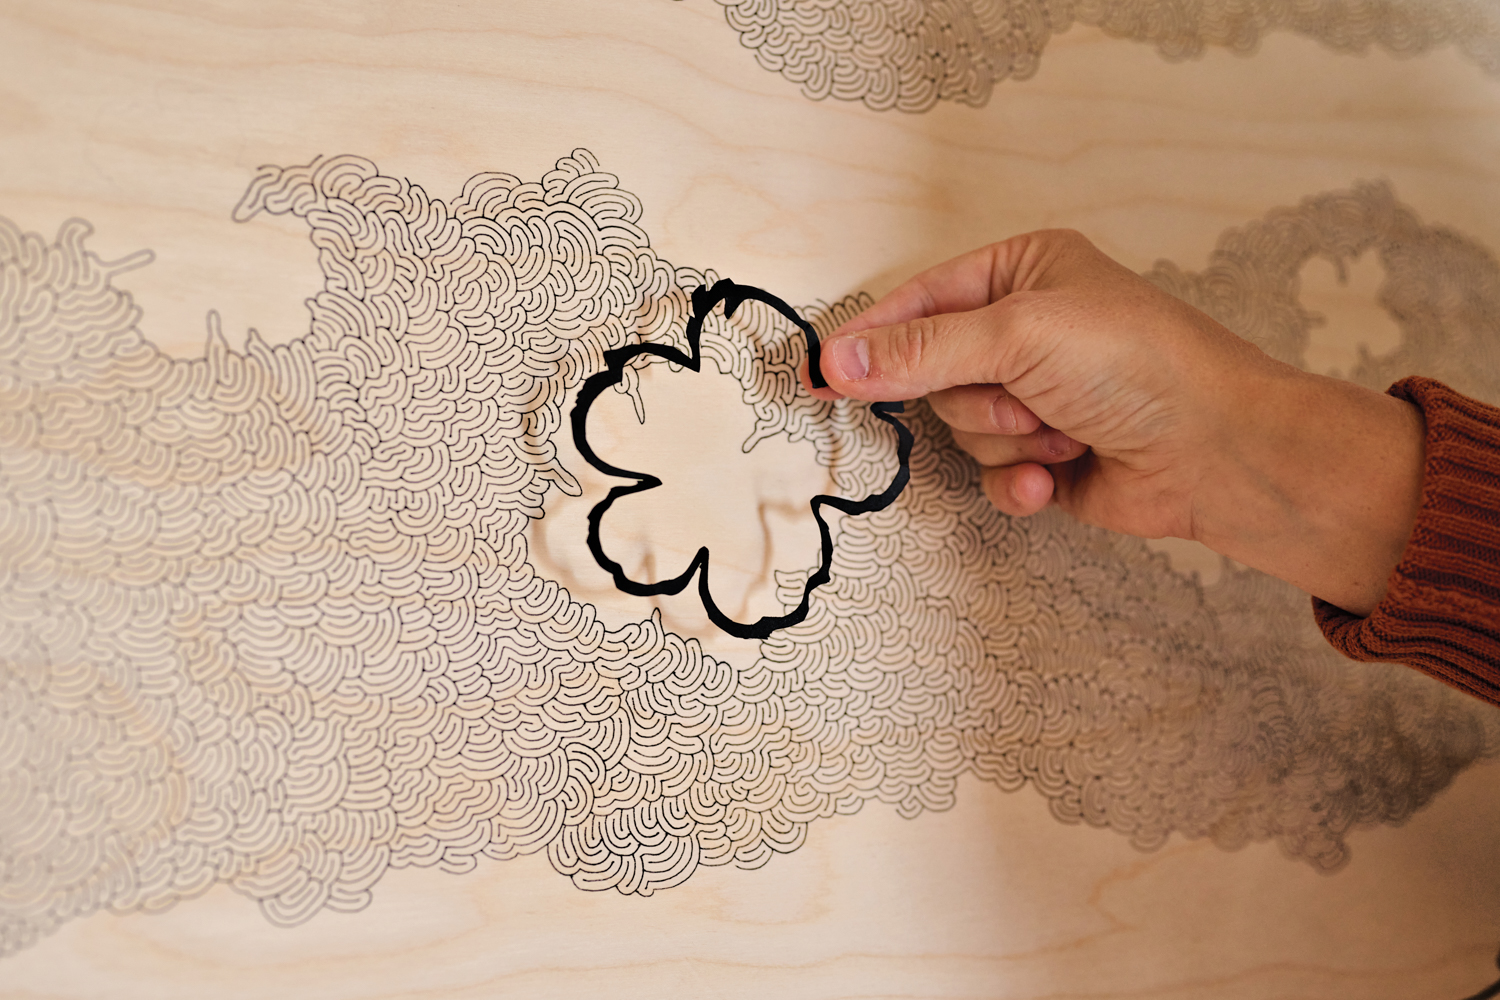 The artist uses hand-cut forms in her work.